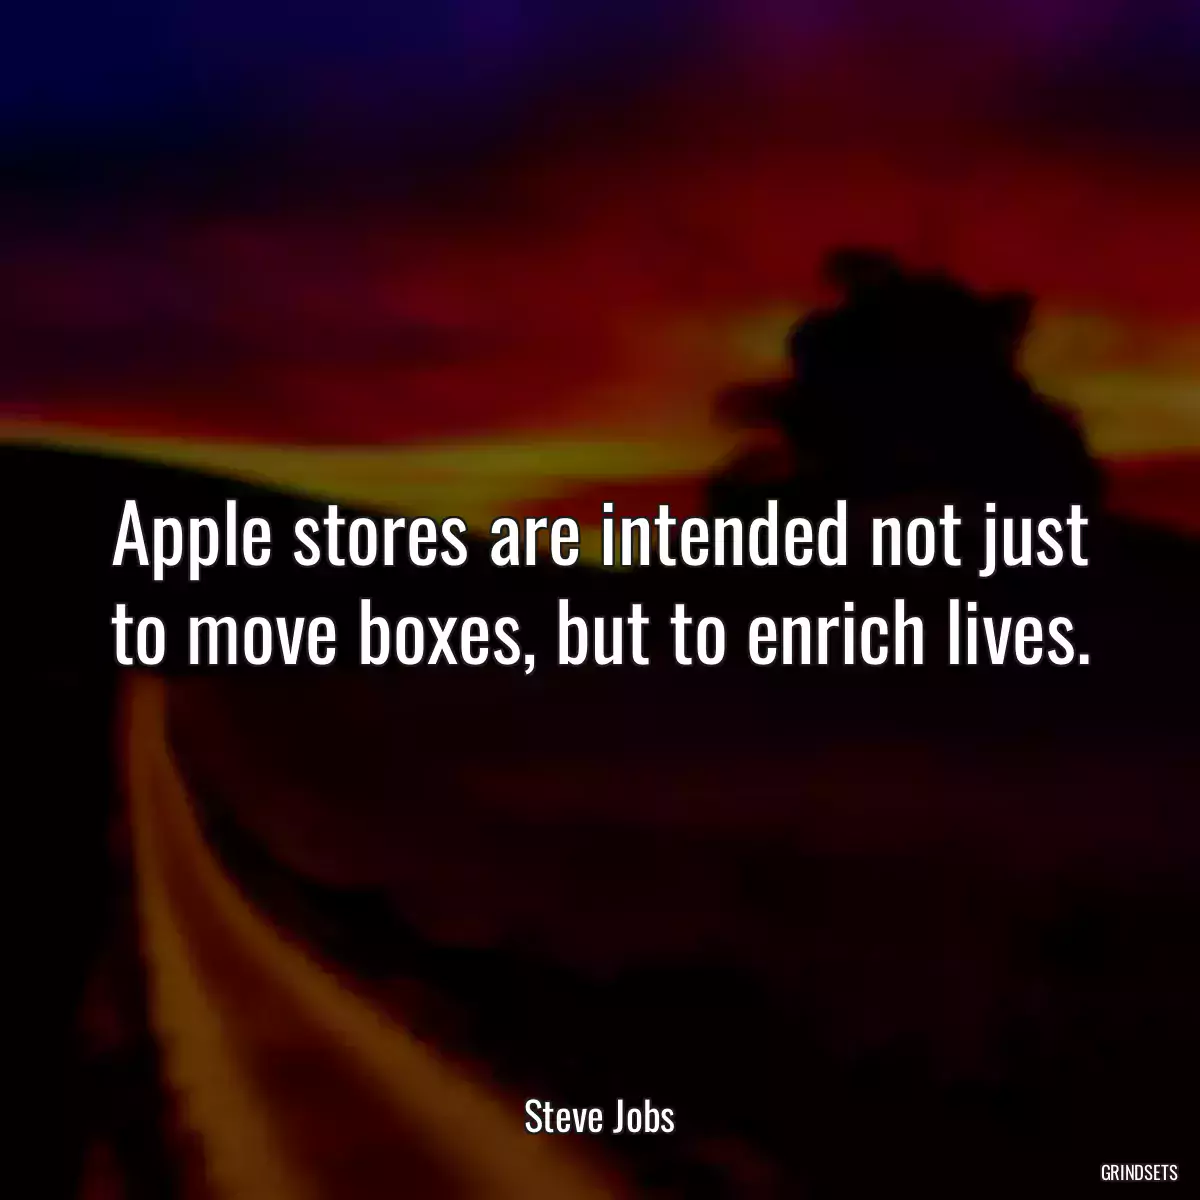 Apple stores are intended not just to move boxes, but to enrich lives.